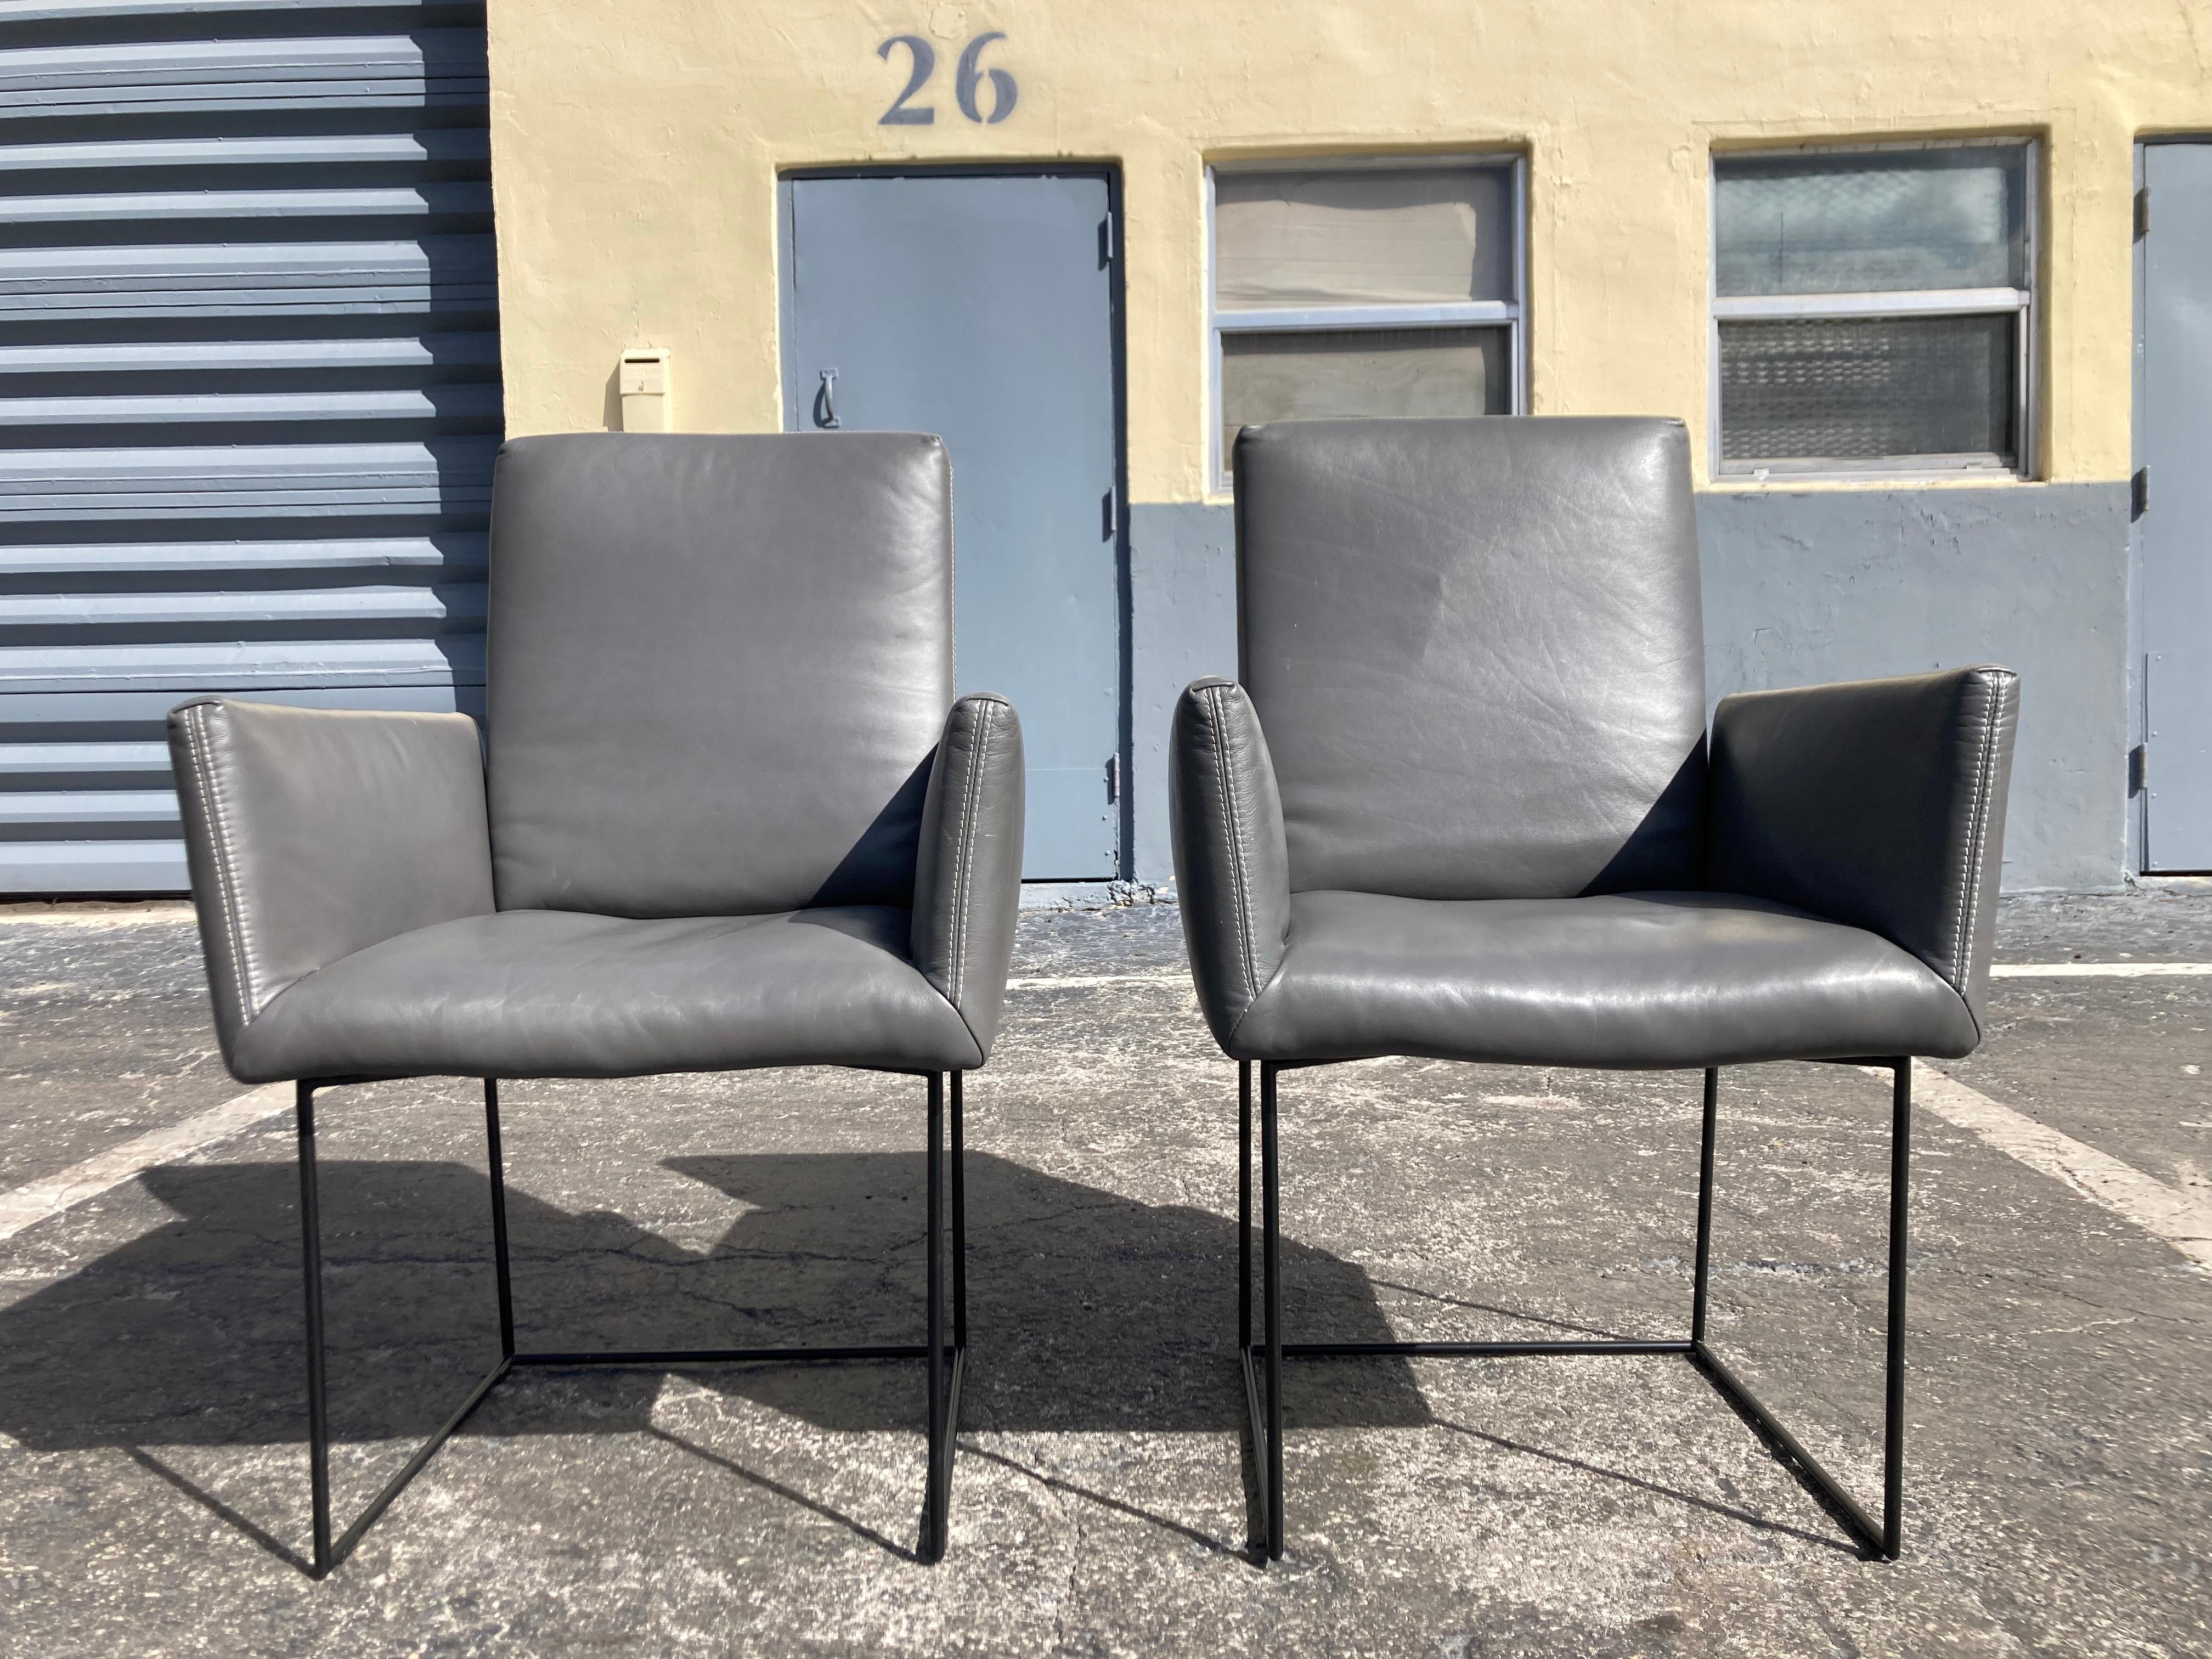 Pair of Casino Leather Arm Chairs Designed by Kurt Beier & Kati Quinger for Bullfrog. Made in Germany, gray leather and black steel base. Back is adjustable.